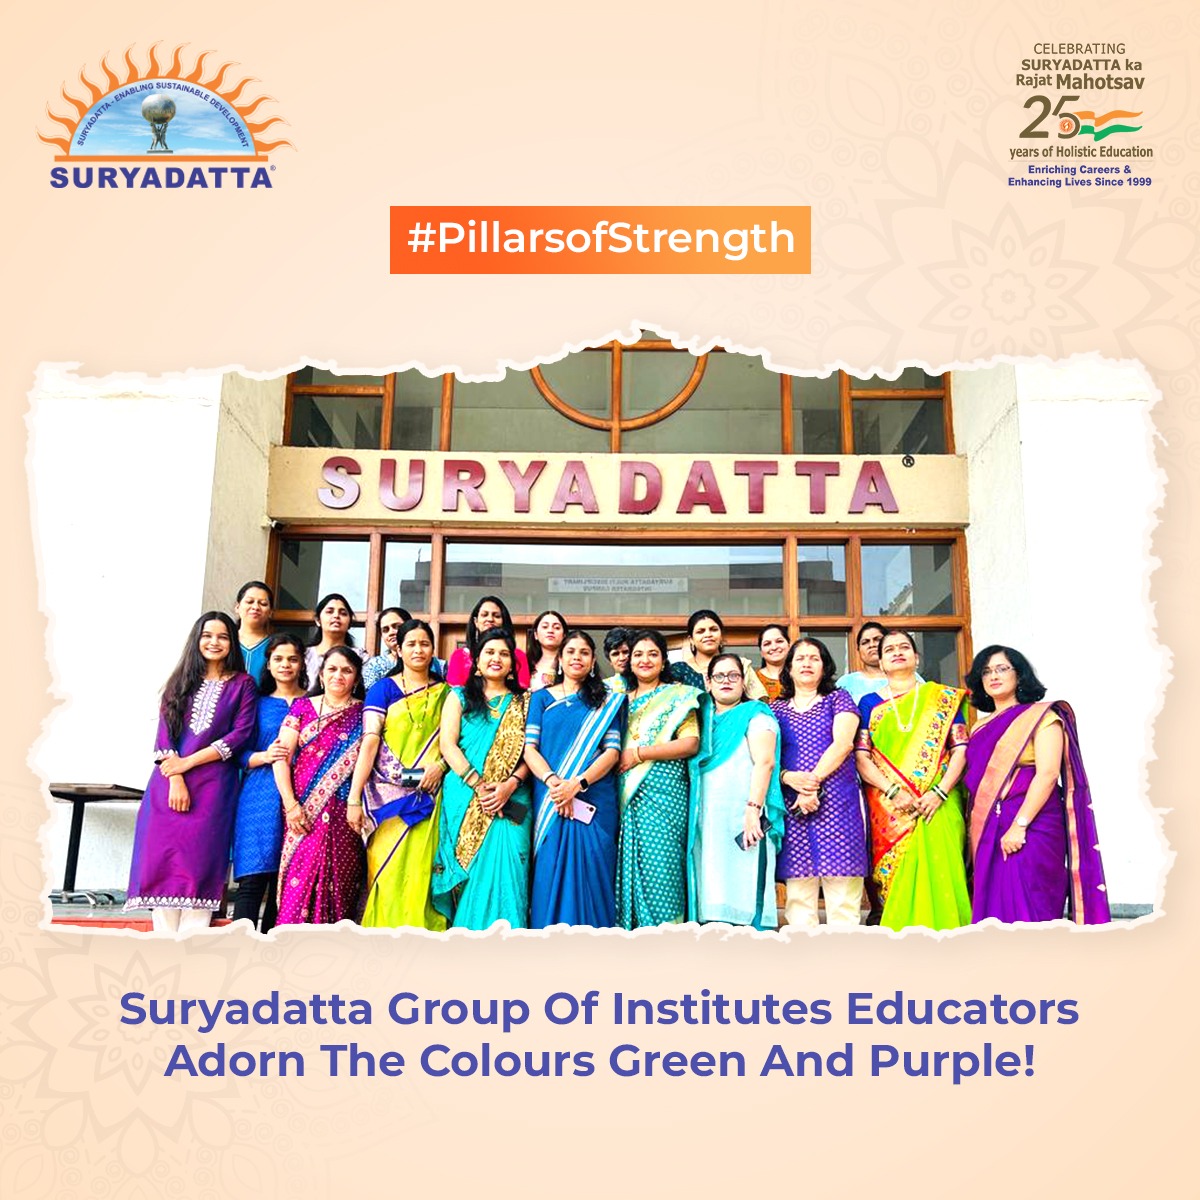 Our incredible #womeneducators and #diligentstaff, adorned in resplendent shades of green and purple, unite to share the joy and light up our campus with their infectious smiles. Join us in embracing the #festive spirit and rejoicing in the splendor of #Navratri! #LifeATSGI